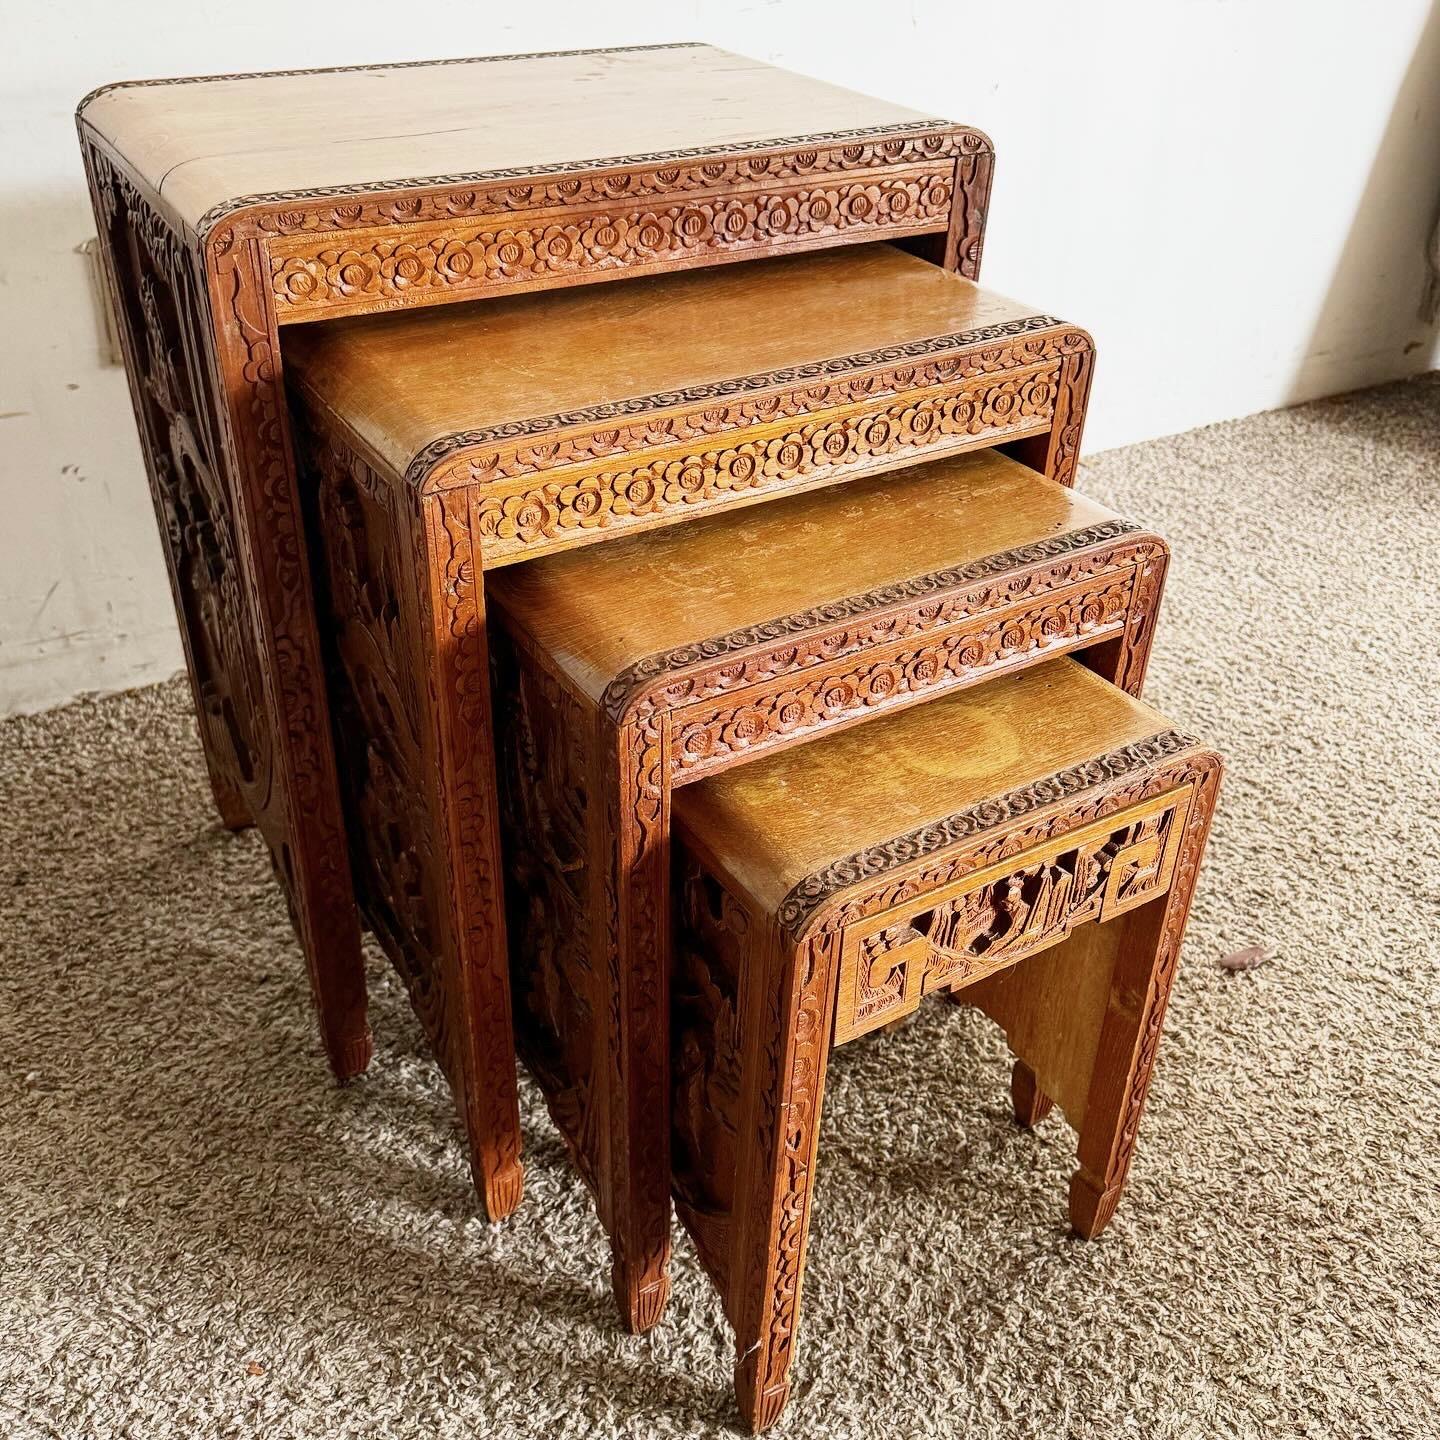 This exquisite set of four Antique Chinese Hand Carved Nesting Tables is a masterpiece of craftsmanship and traditional design. Each table in the set features intricate carvings with detailed Chinese depictions on the sides and borders, showcasing